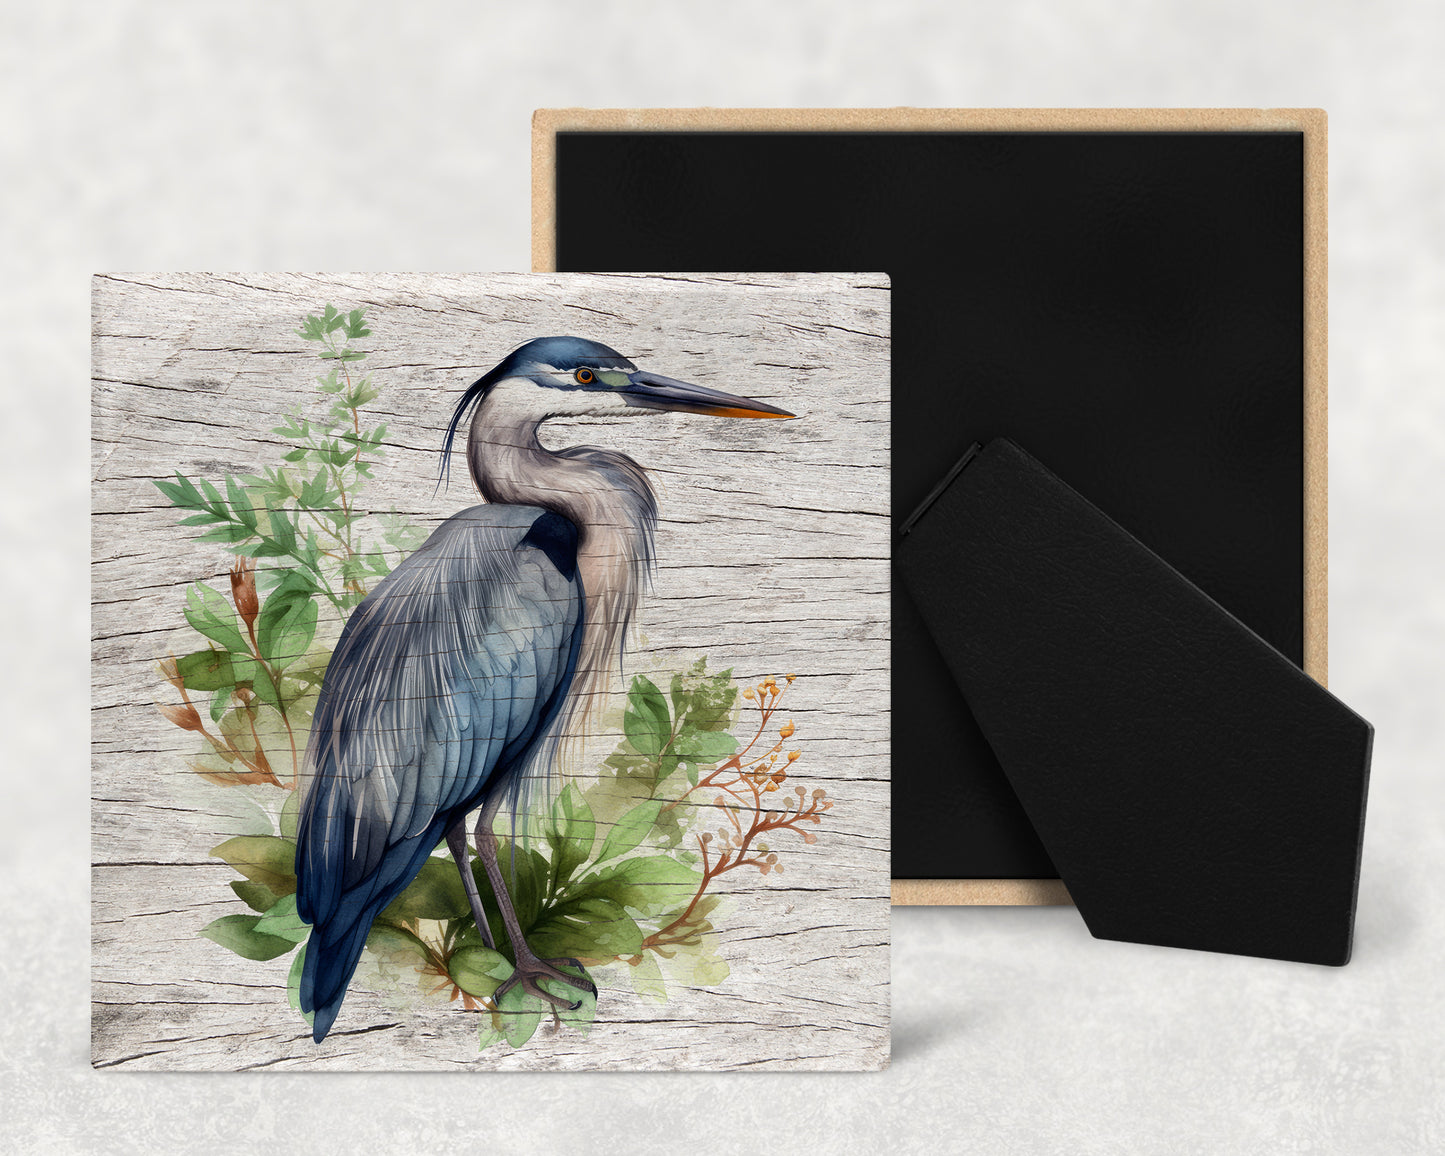 Watercolor Great Blue Heron Art Decorative Ceramic Tile with Optional Easel Back - Available in 3 Sizes